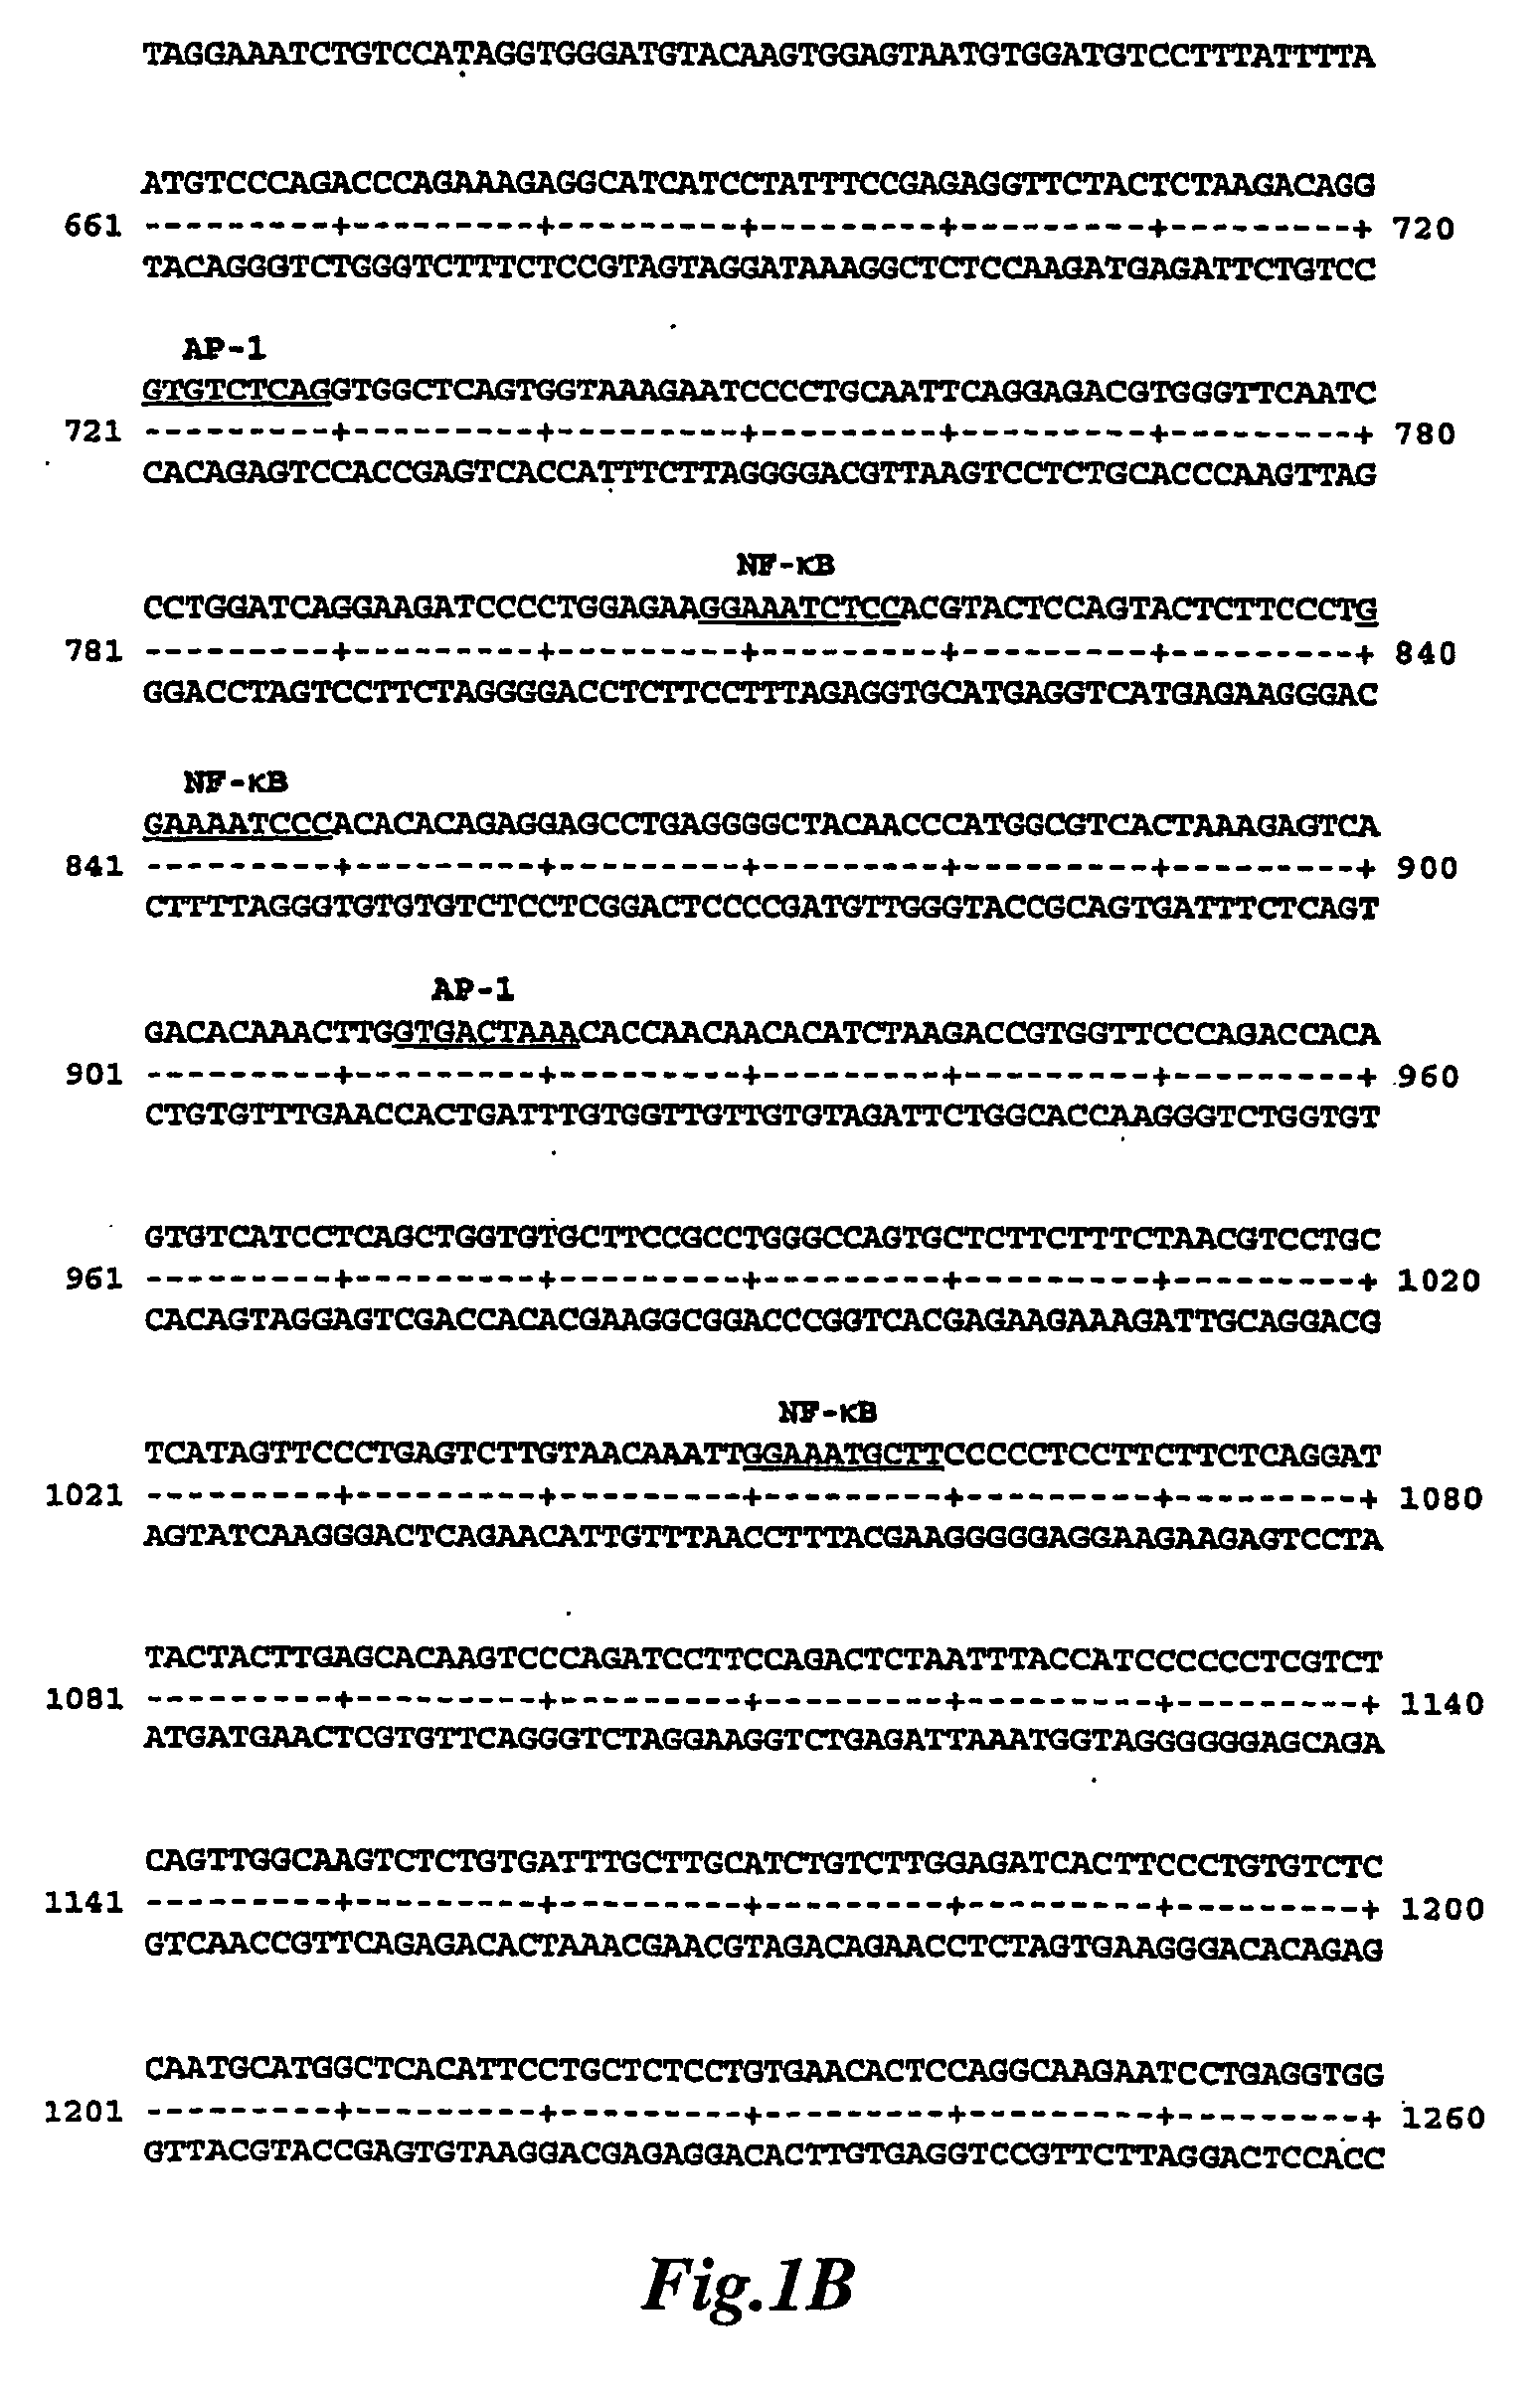 Mammary-associated serum amuloid a3 promoter sequences and used for same